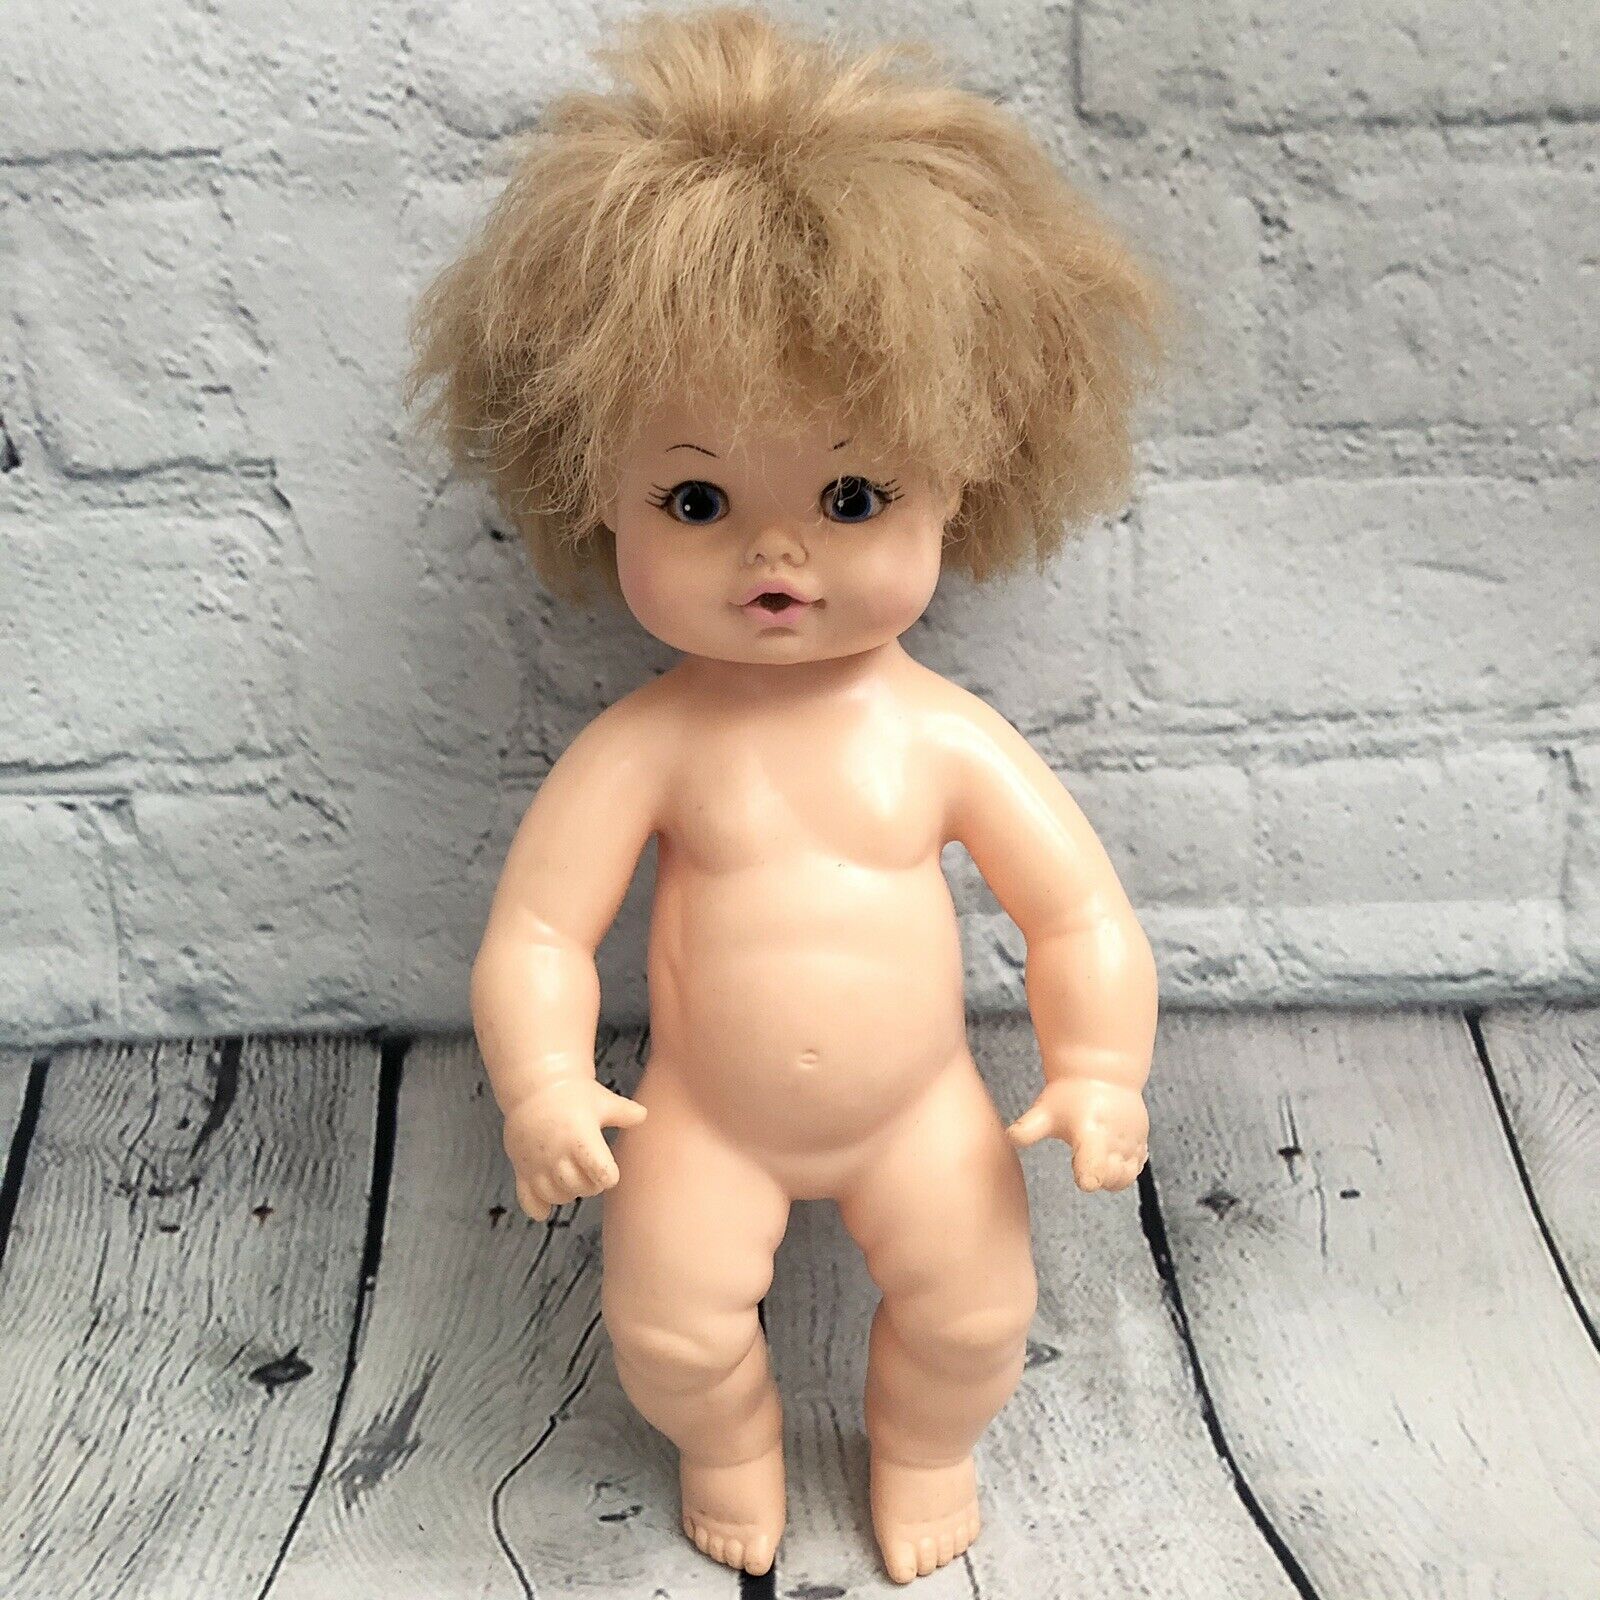 Vtg Rare 1974 11” Horsman Baby Doll Drinks And Wets  #10 3684 Blue Eyes